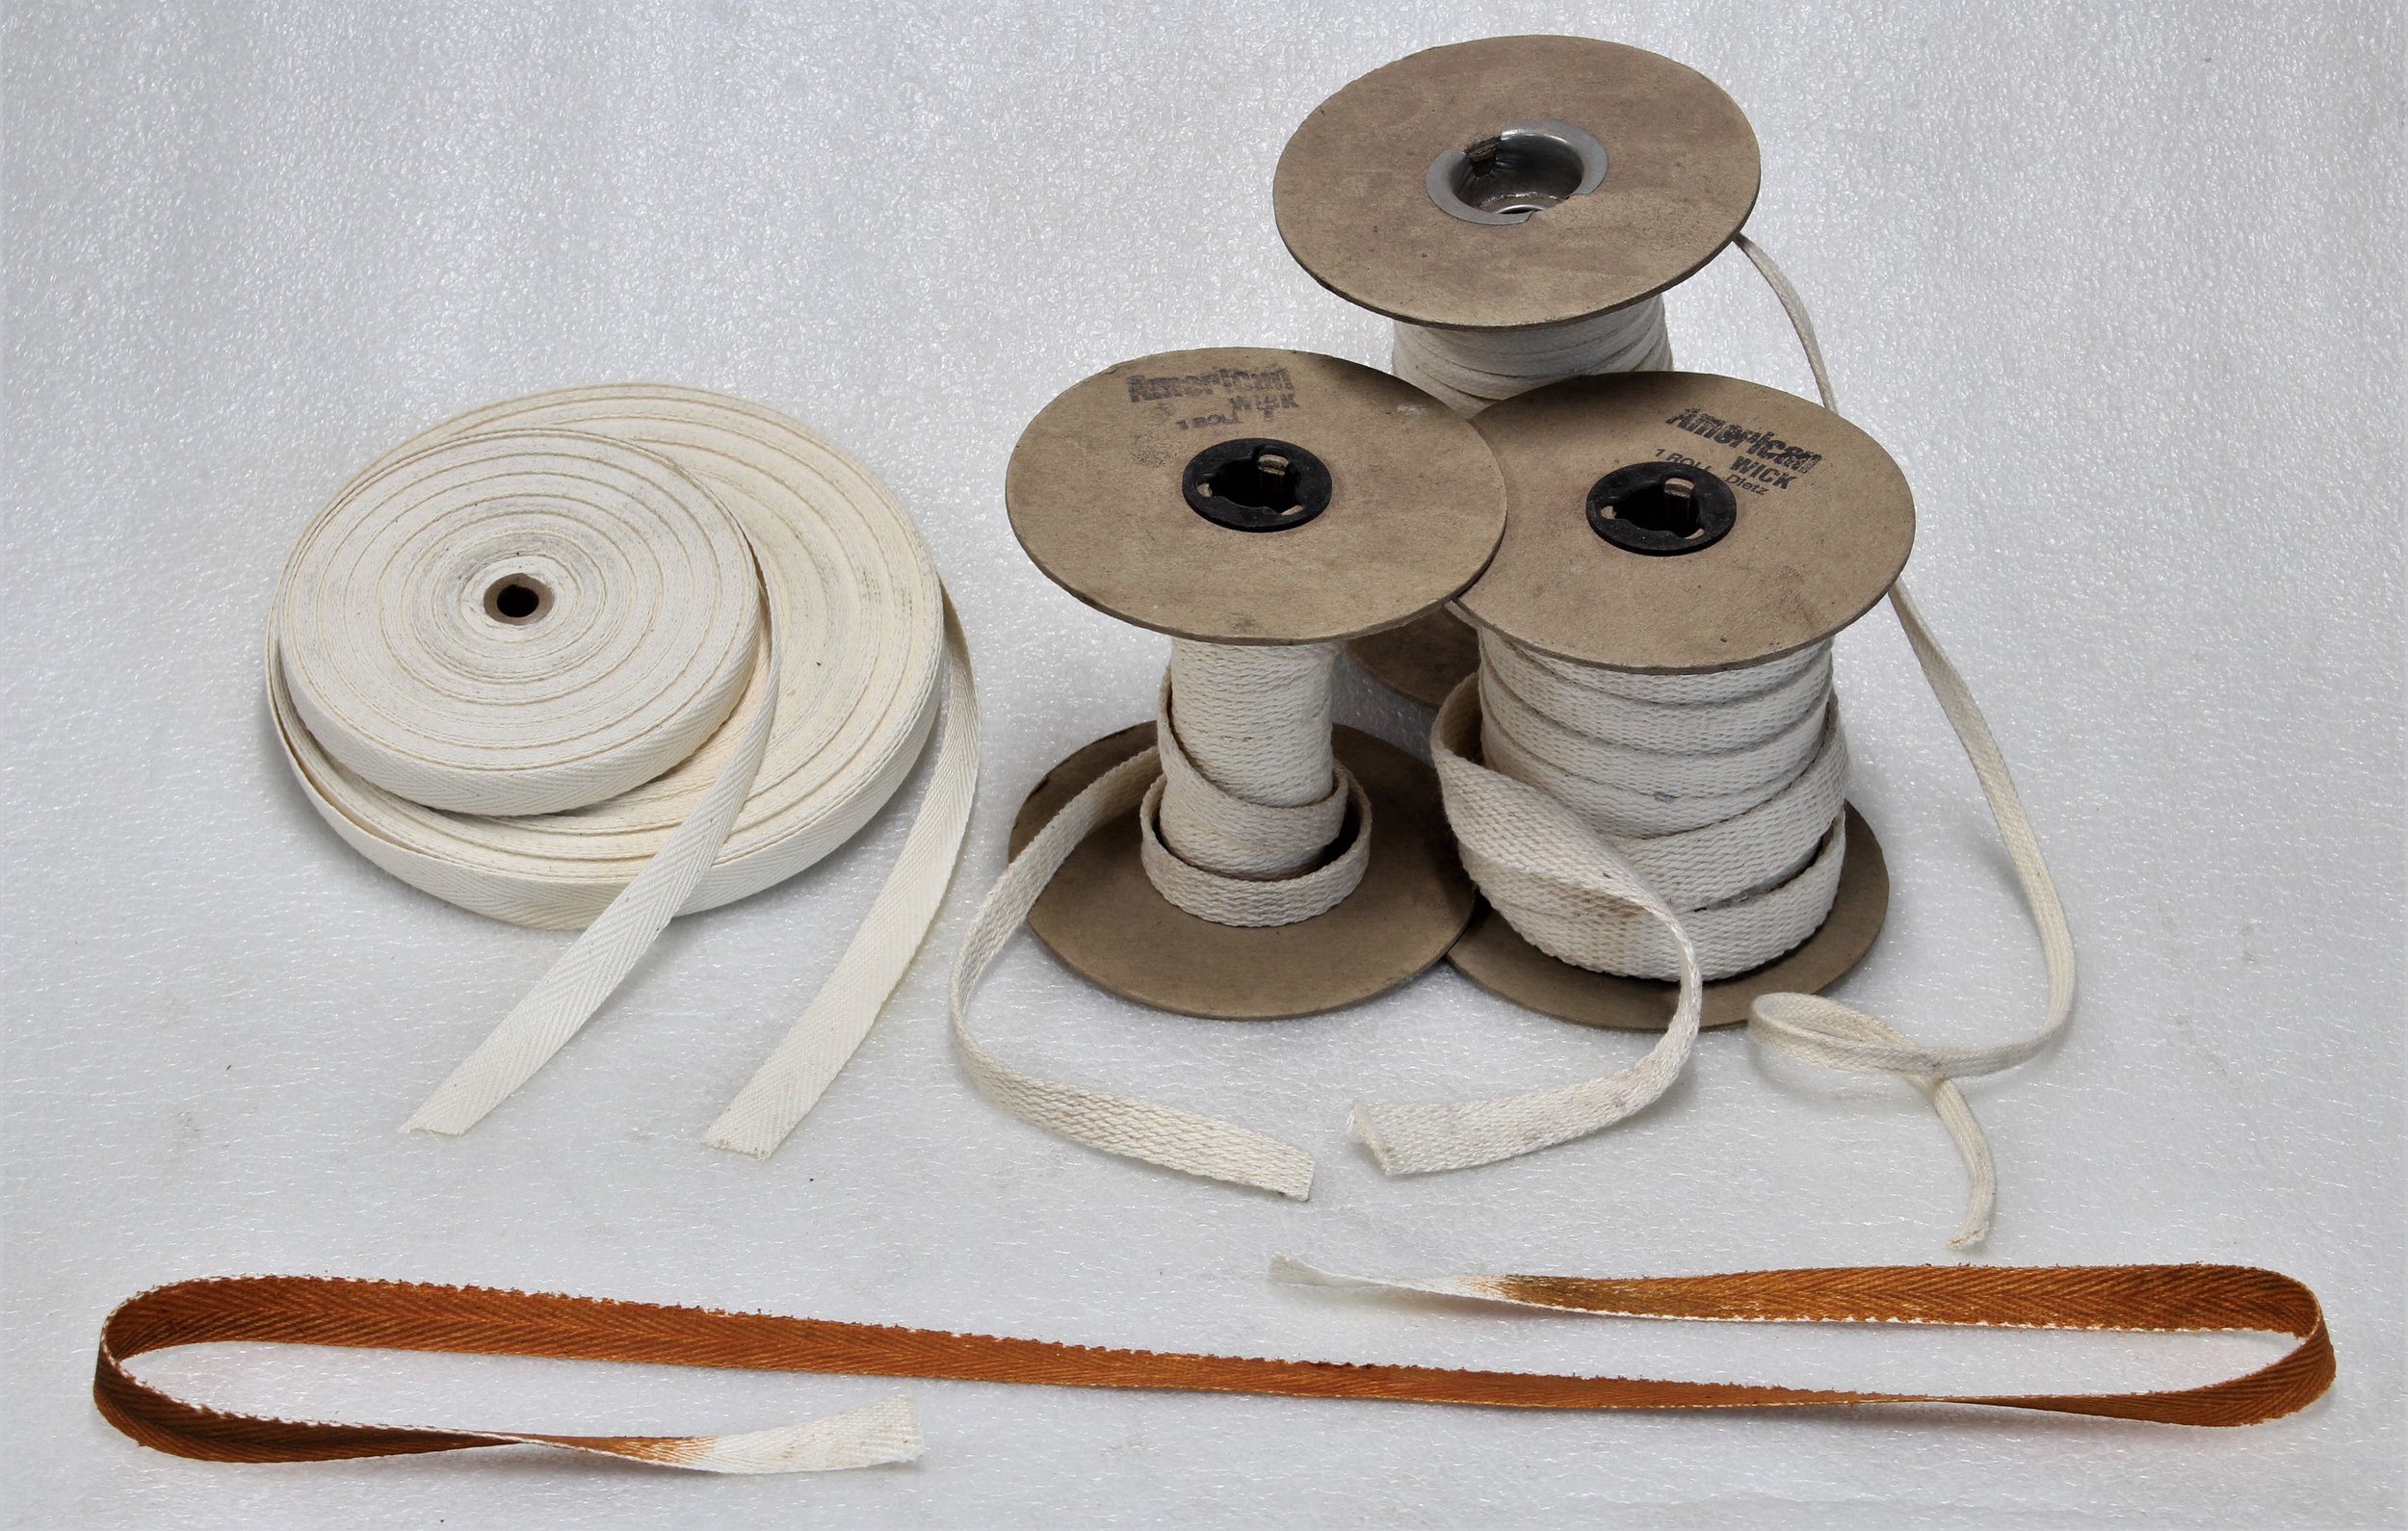 Cotton wicking and strapping are excellent for ragging.